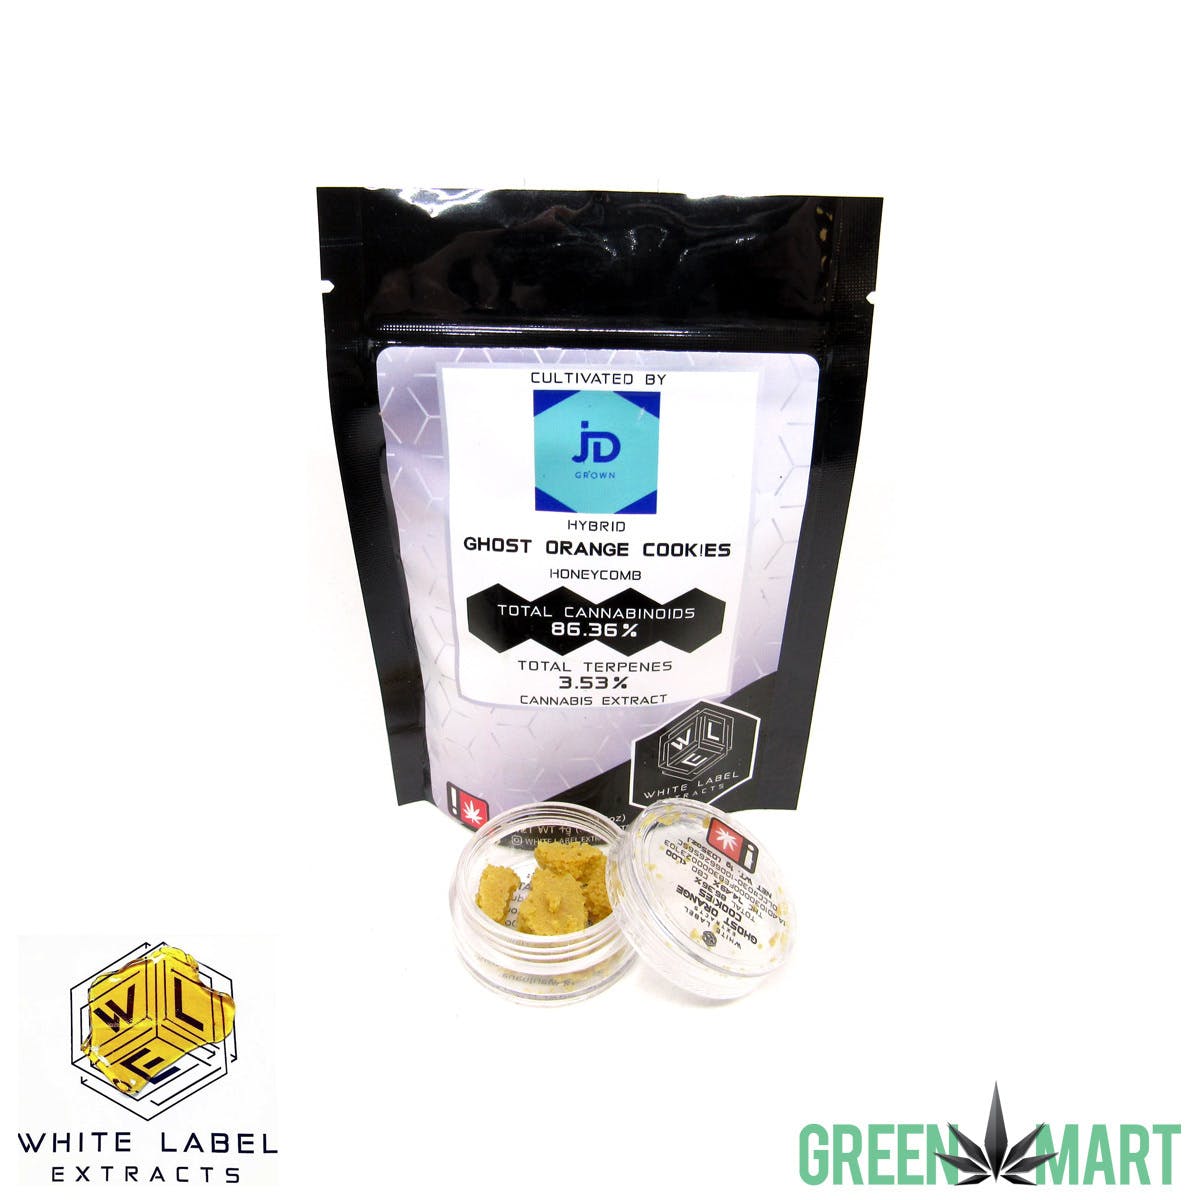 concentrate-white-label-extracts-ghost-orange-cookies